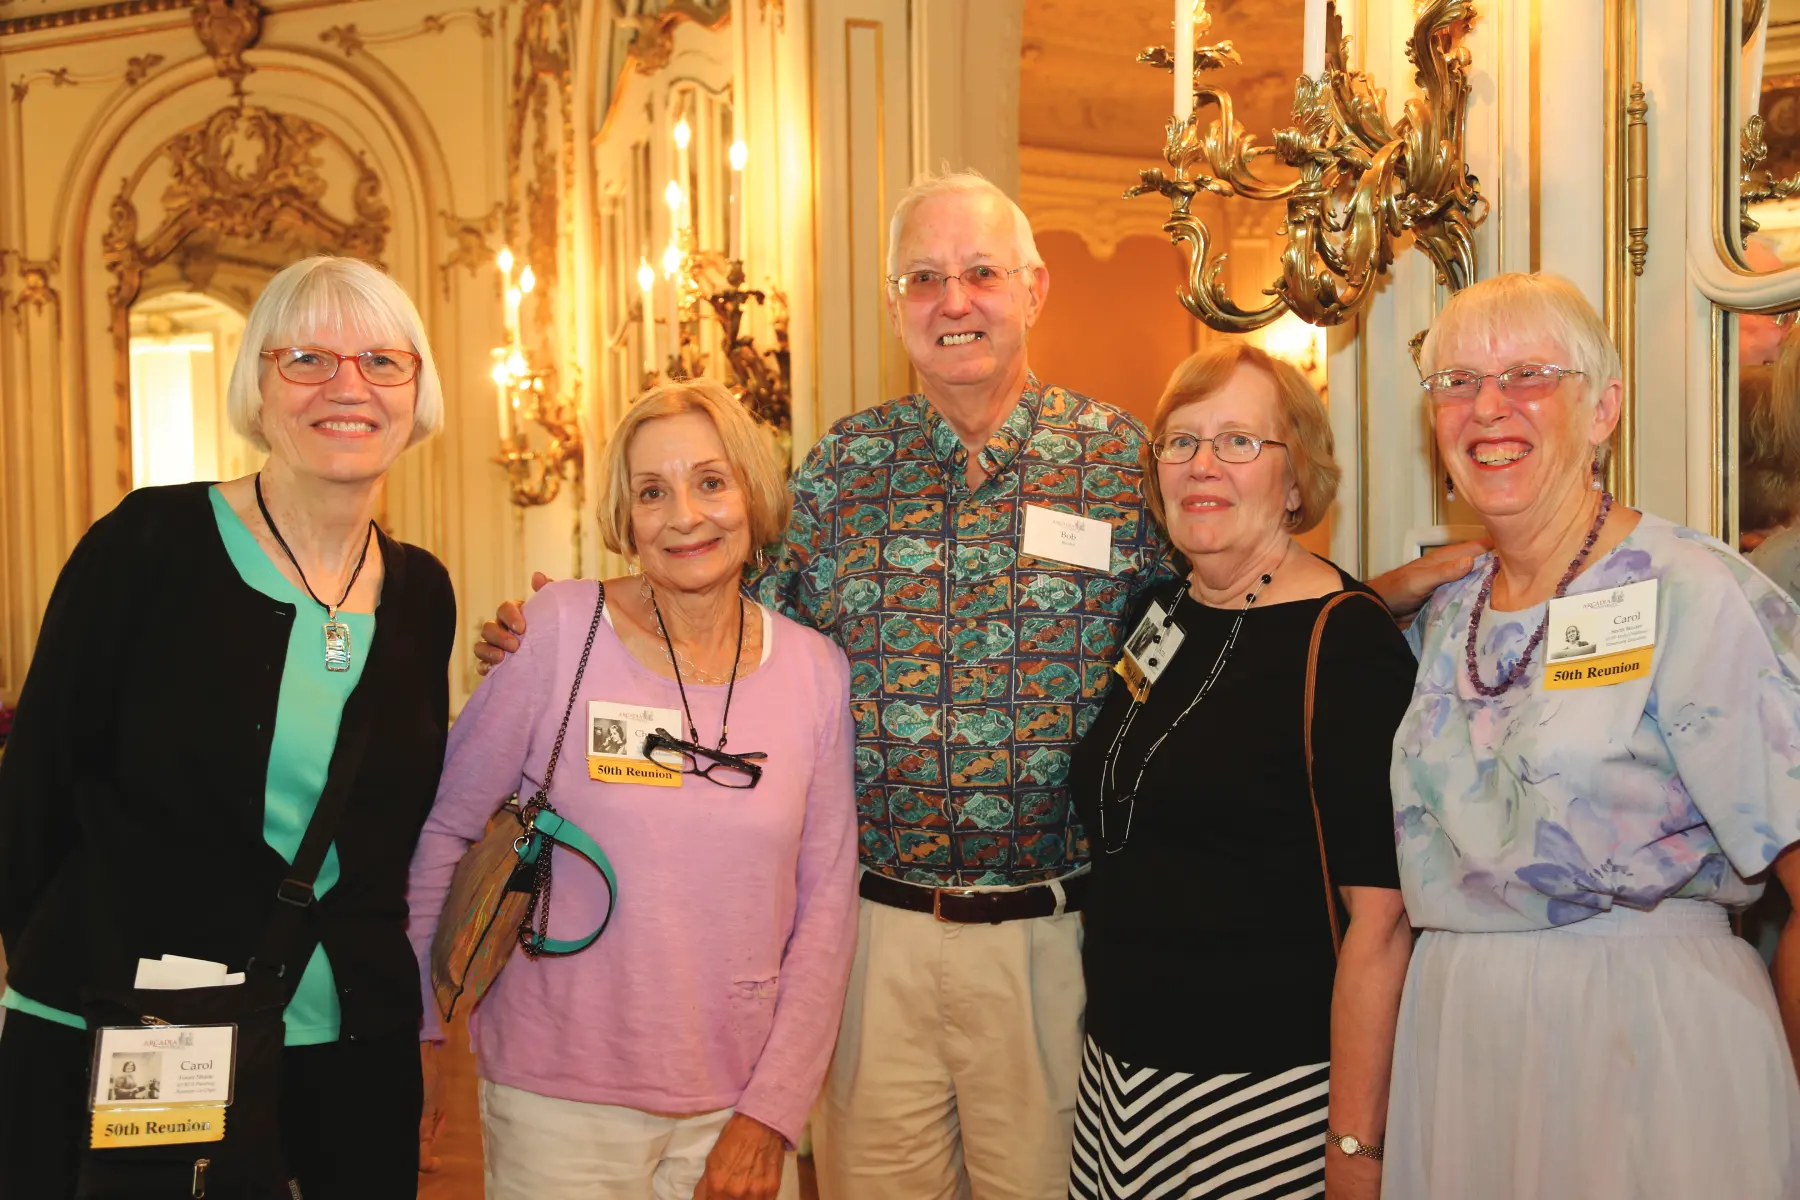 Several alumni from Class of 1965 celebrating their 50th Reunion